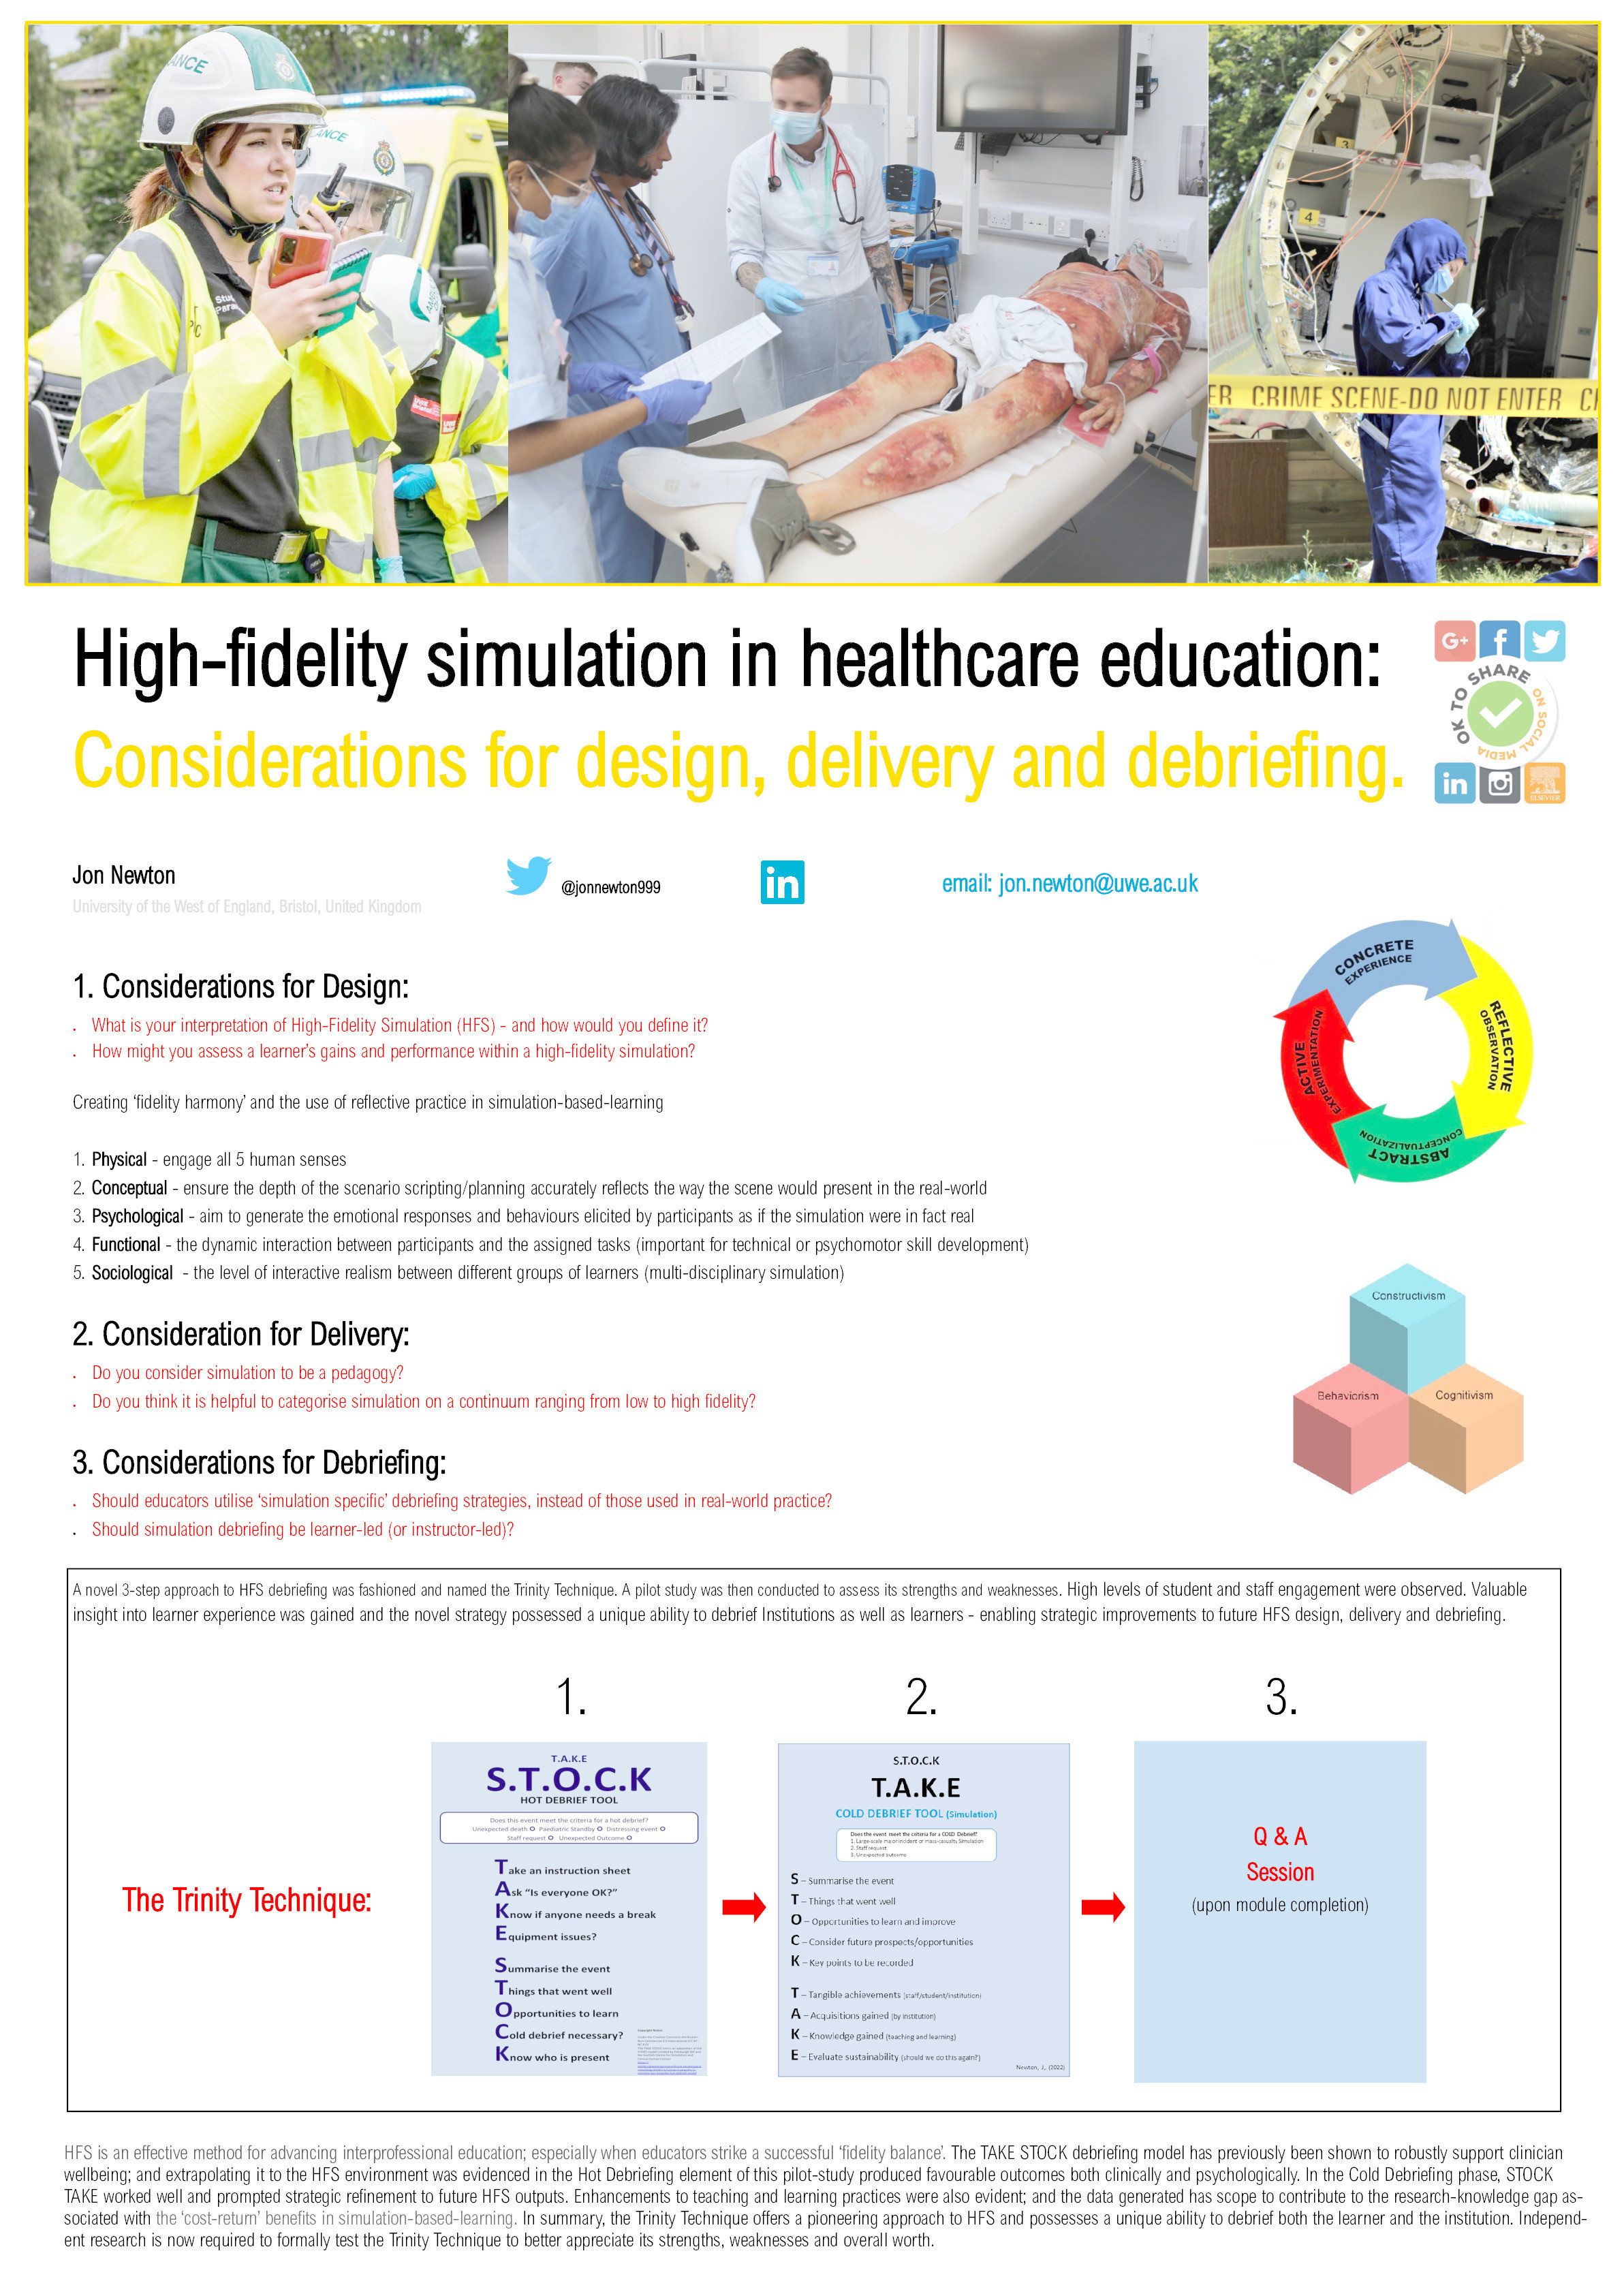 High-fidelity simulation in healthcare education: Considerations for design, delivery and debriefing Thumbnail